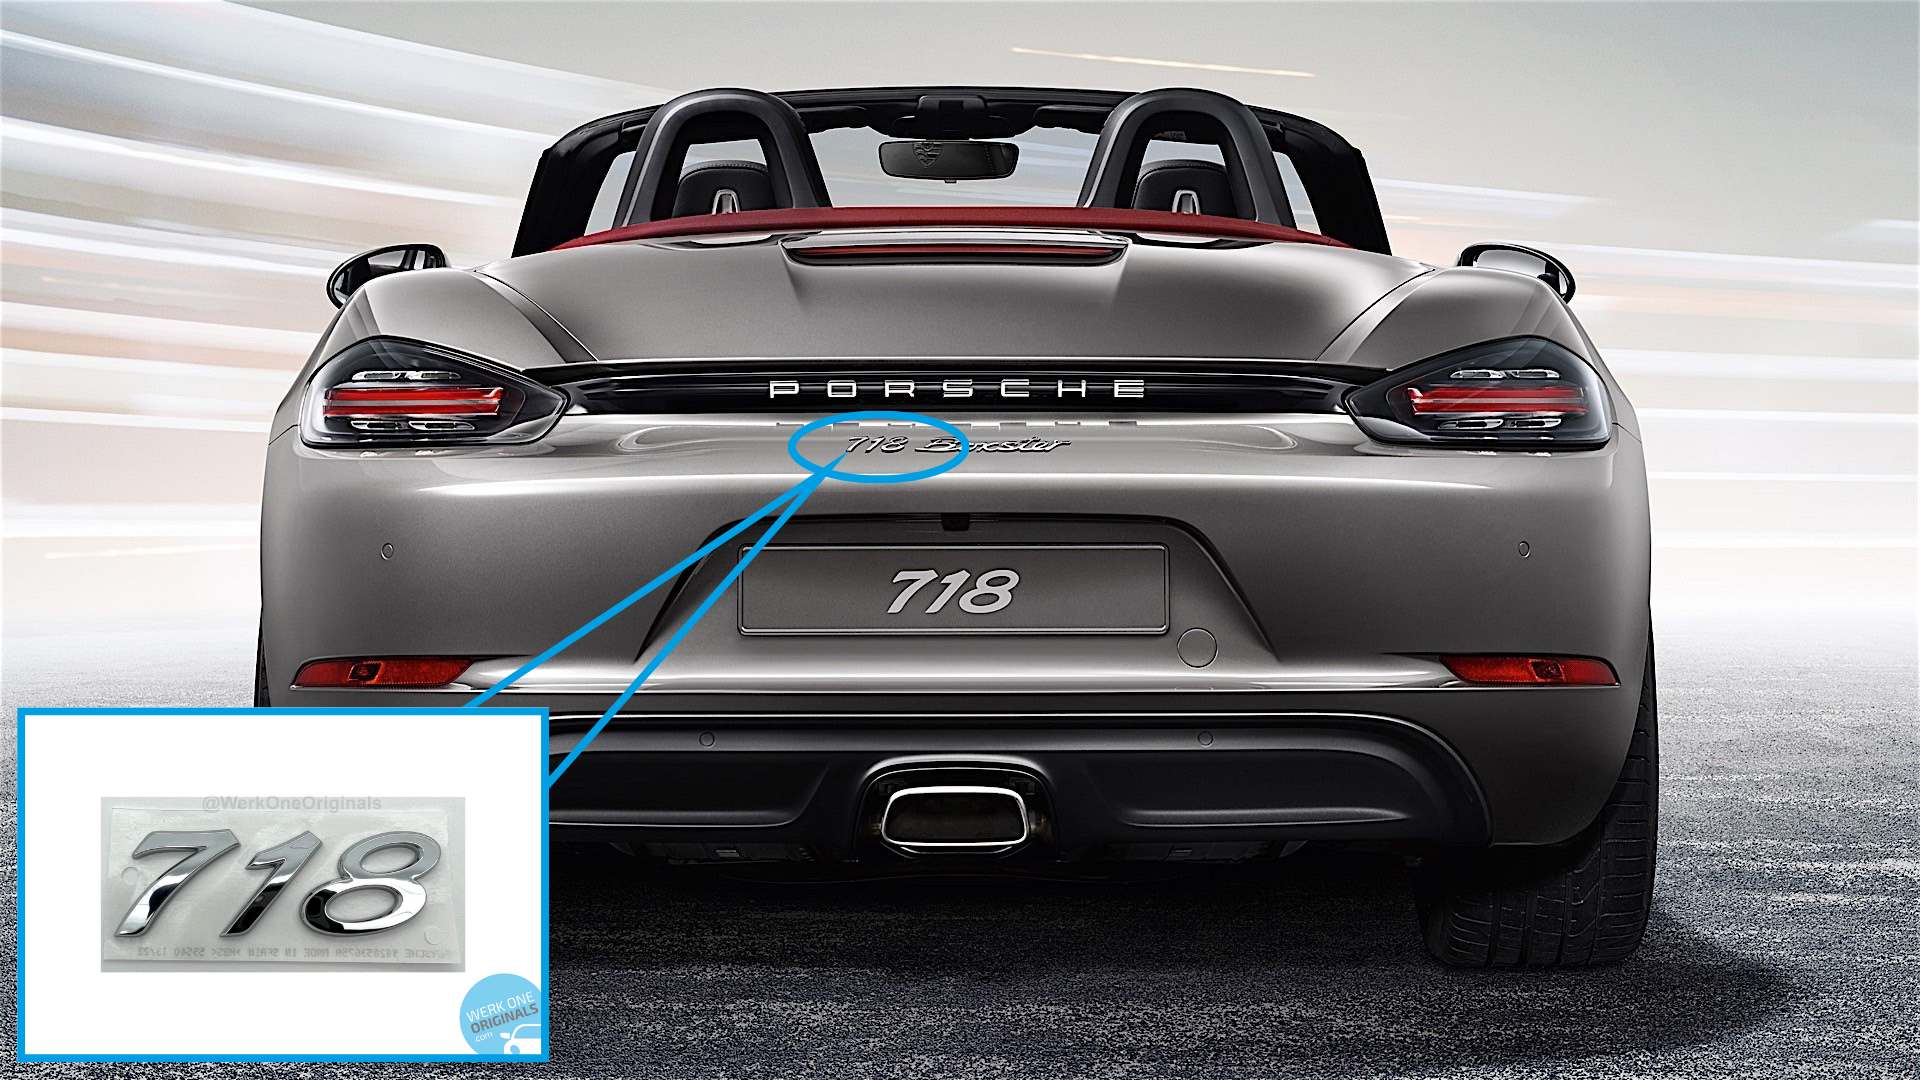 Porsche Official '718' Rear Badge in Chrome Silver for 718 Boxster & Cayman Models